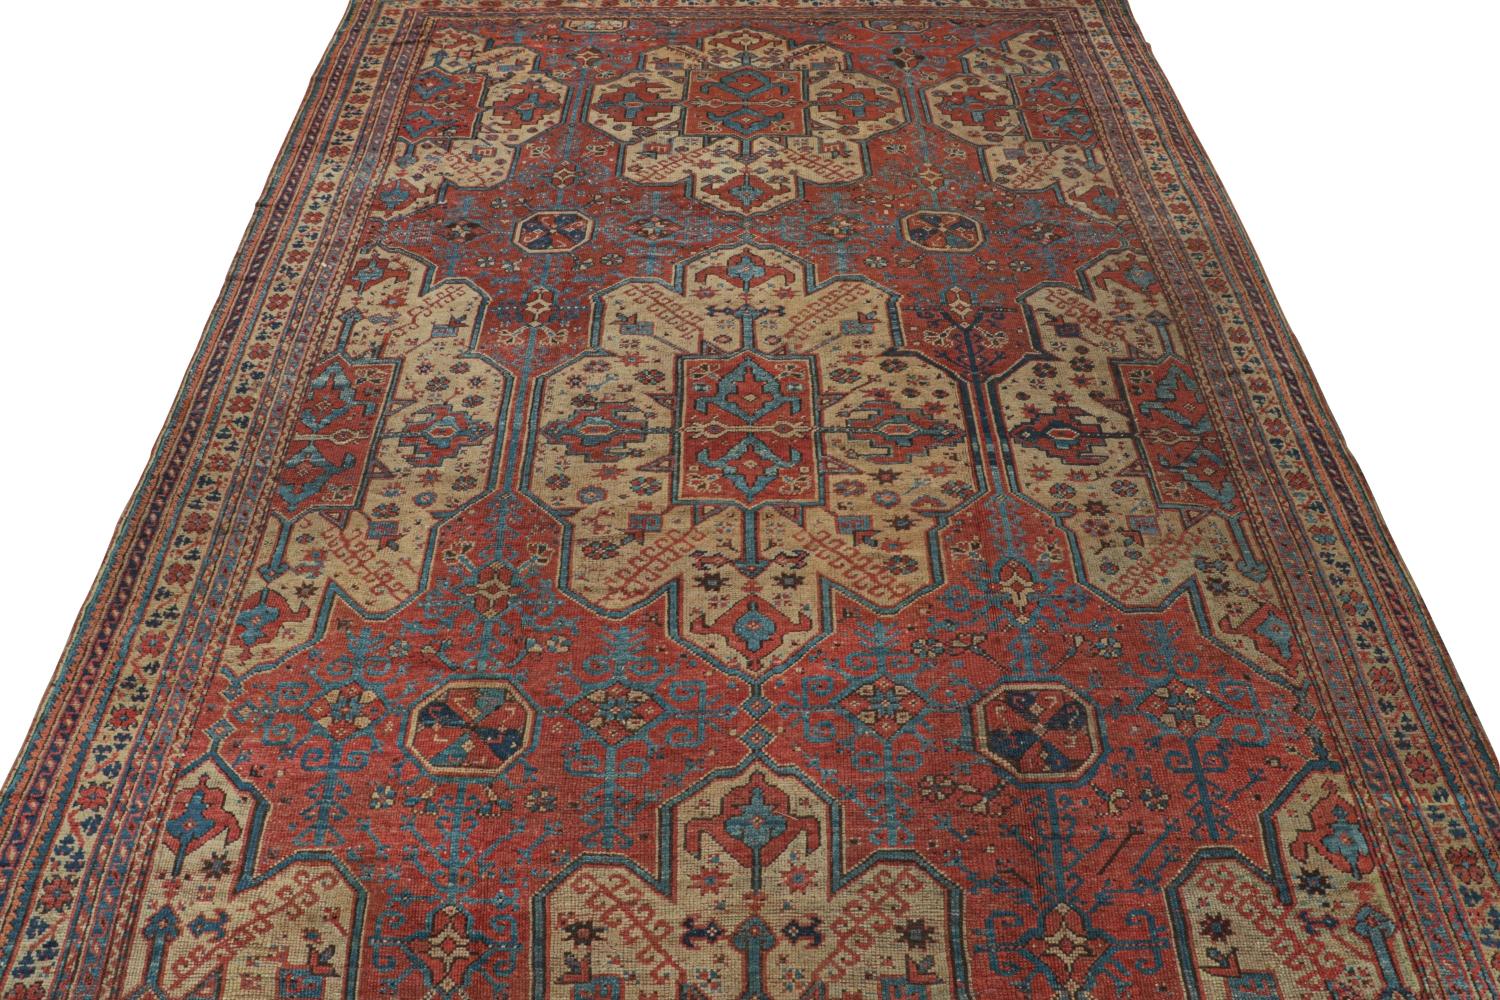 Antique Oversized Oushak Rug in Red with Geometric Patterns In Good Condition For Sale In Long Island City, NY